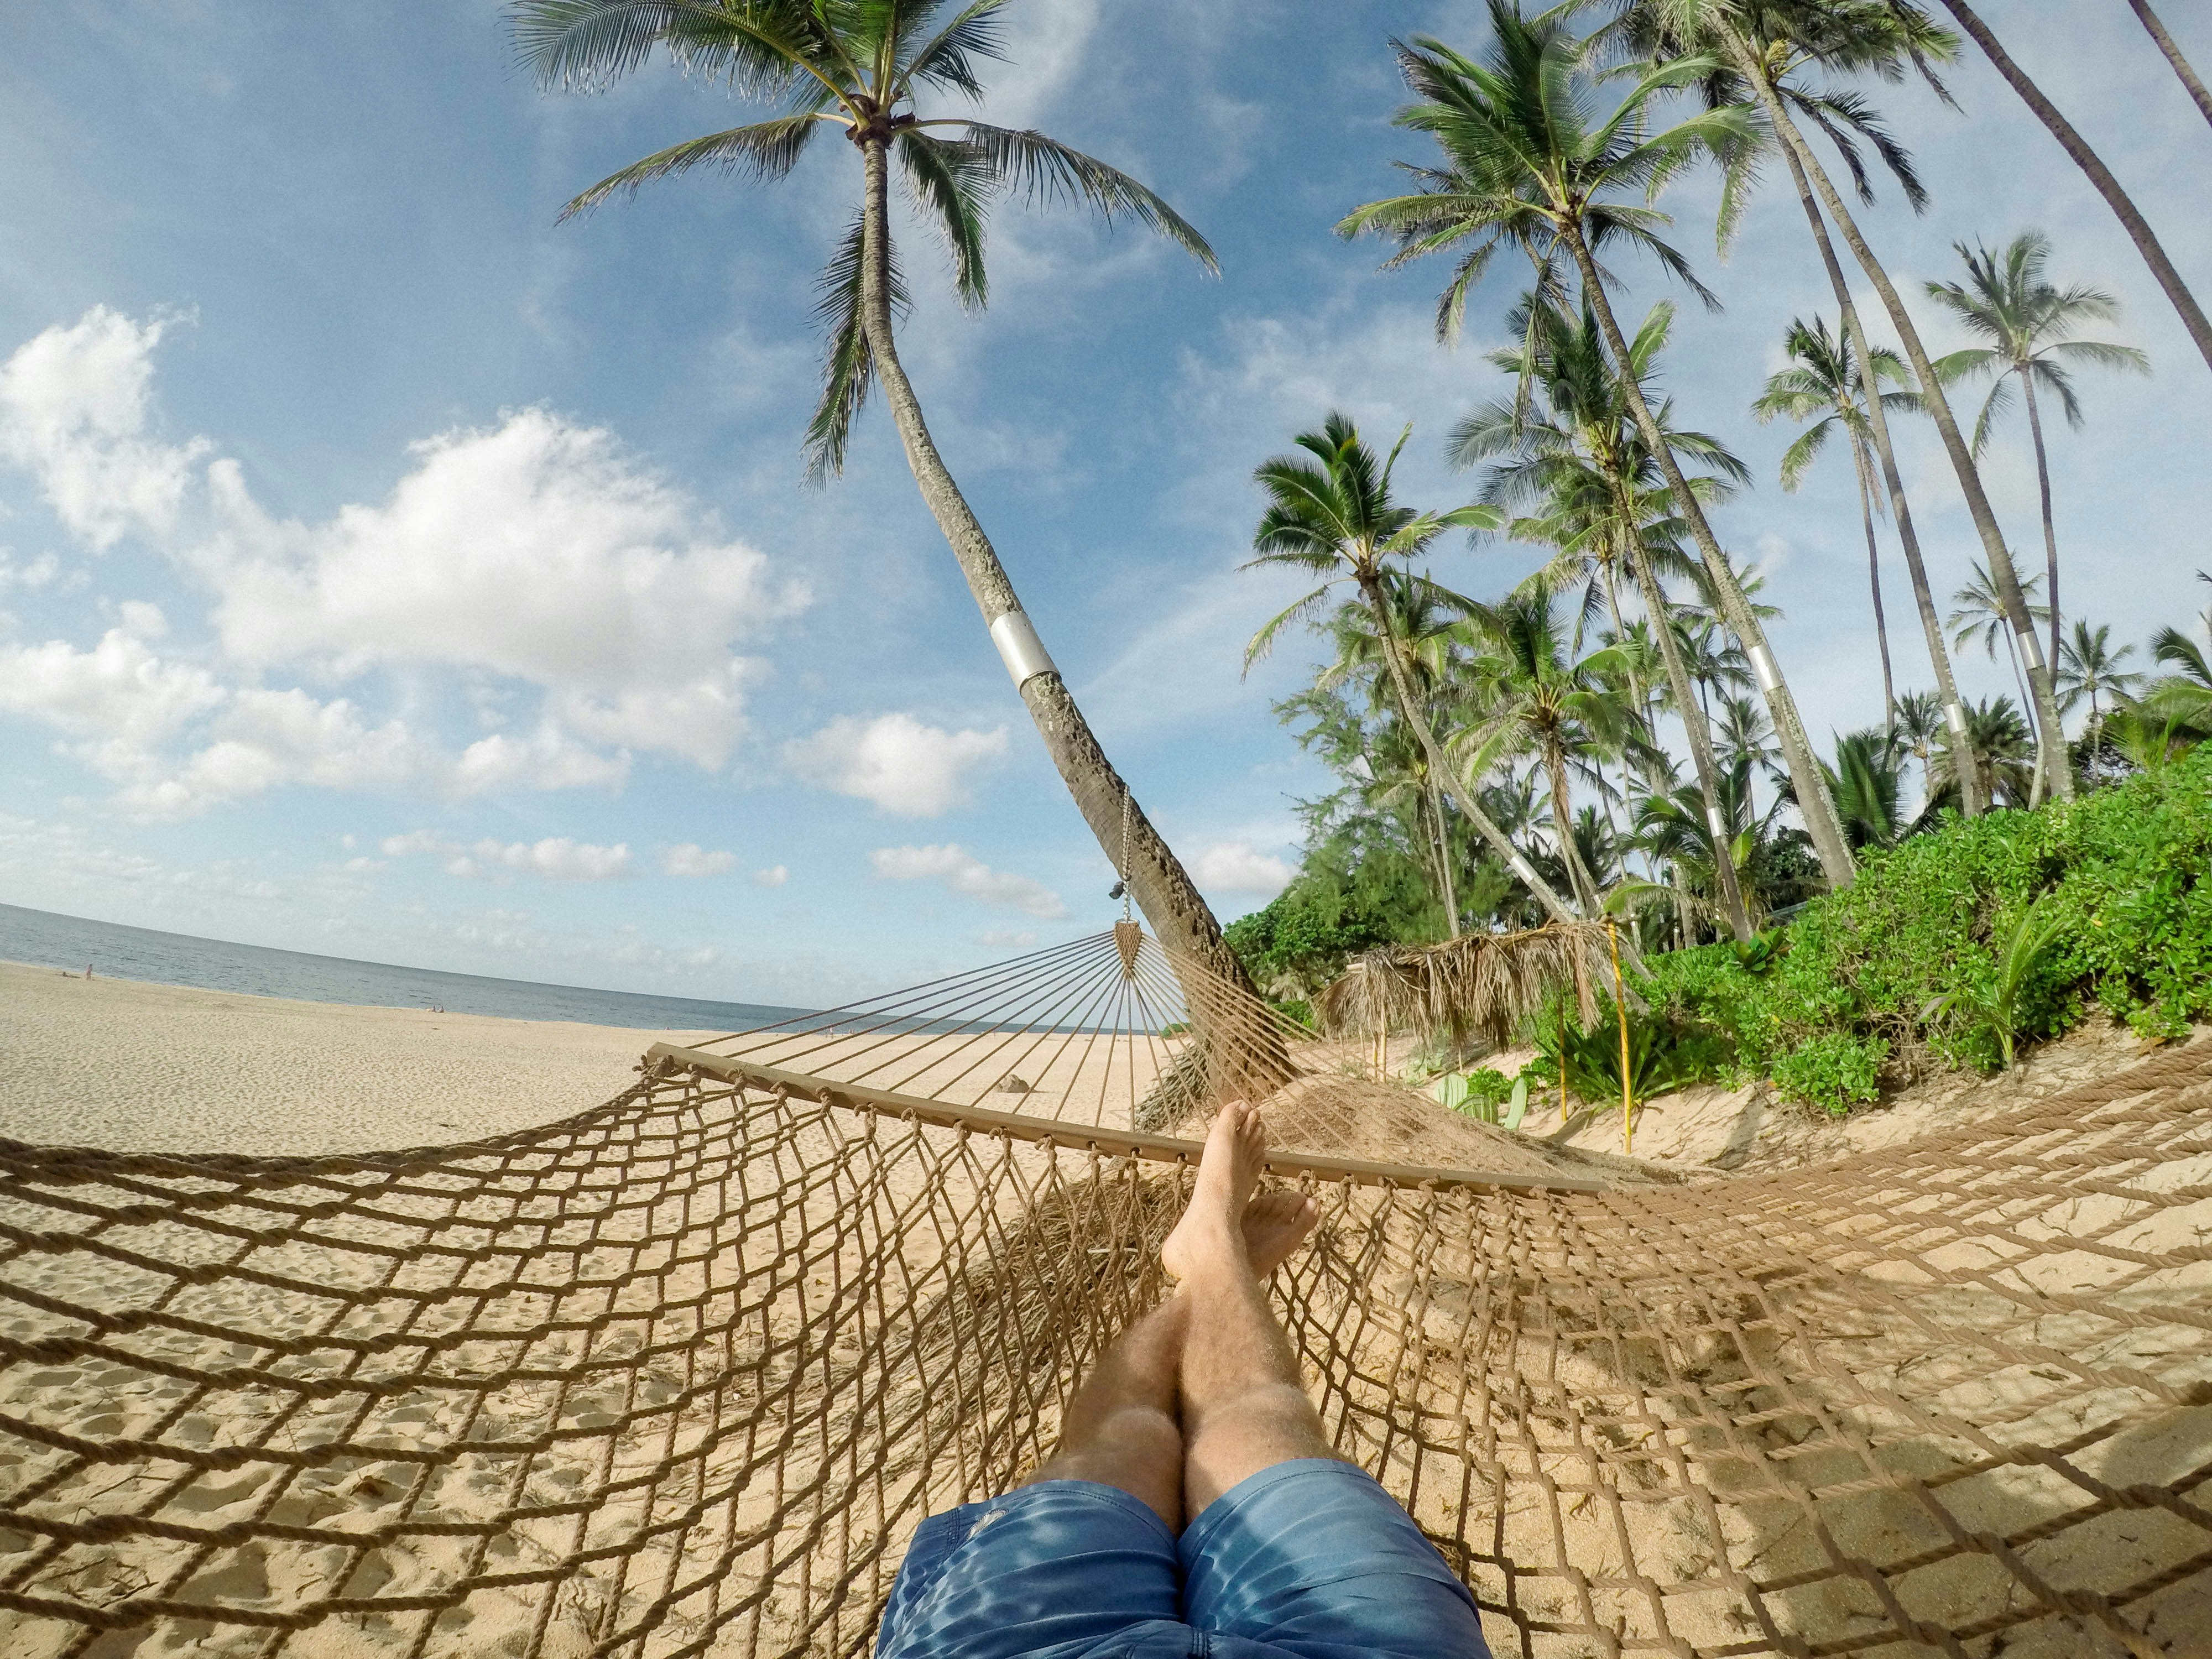 A person lying down in a hammock on the beach.